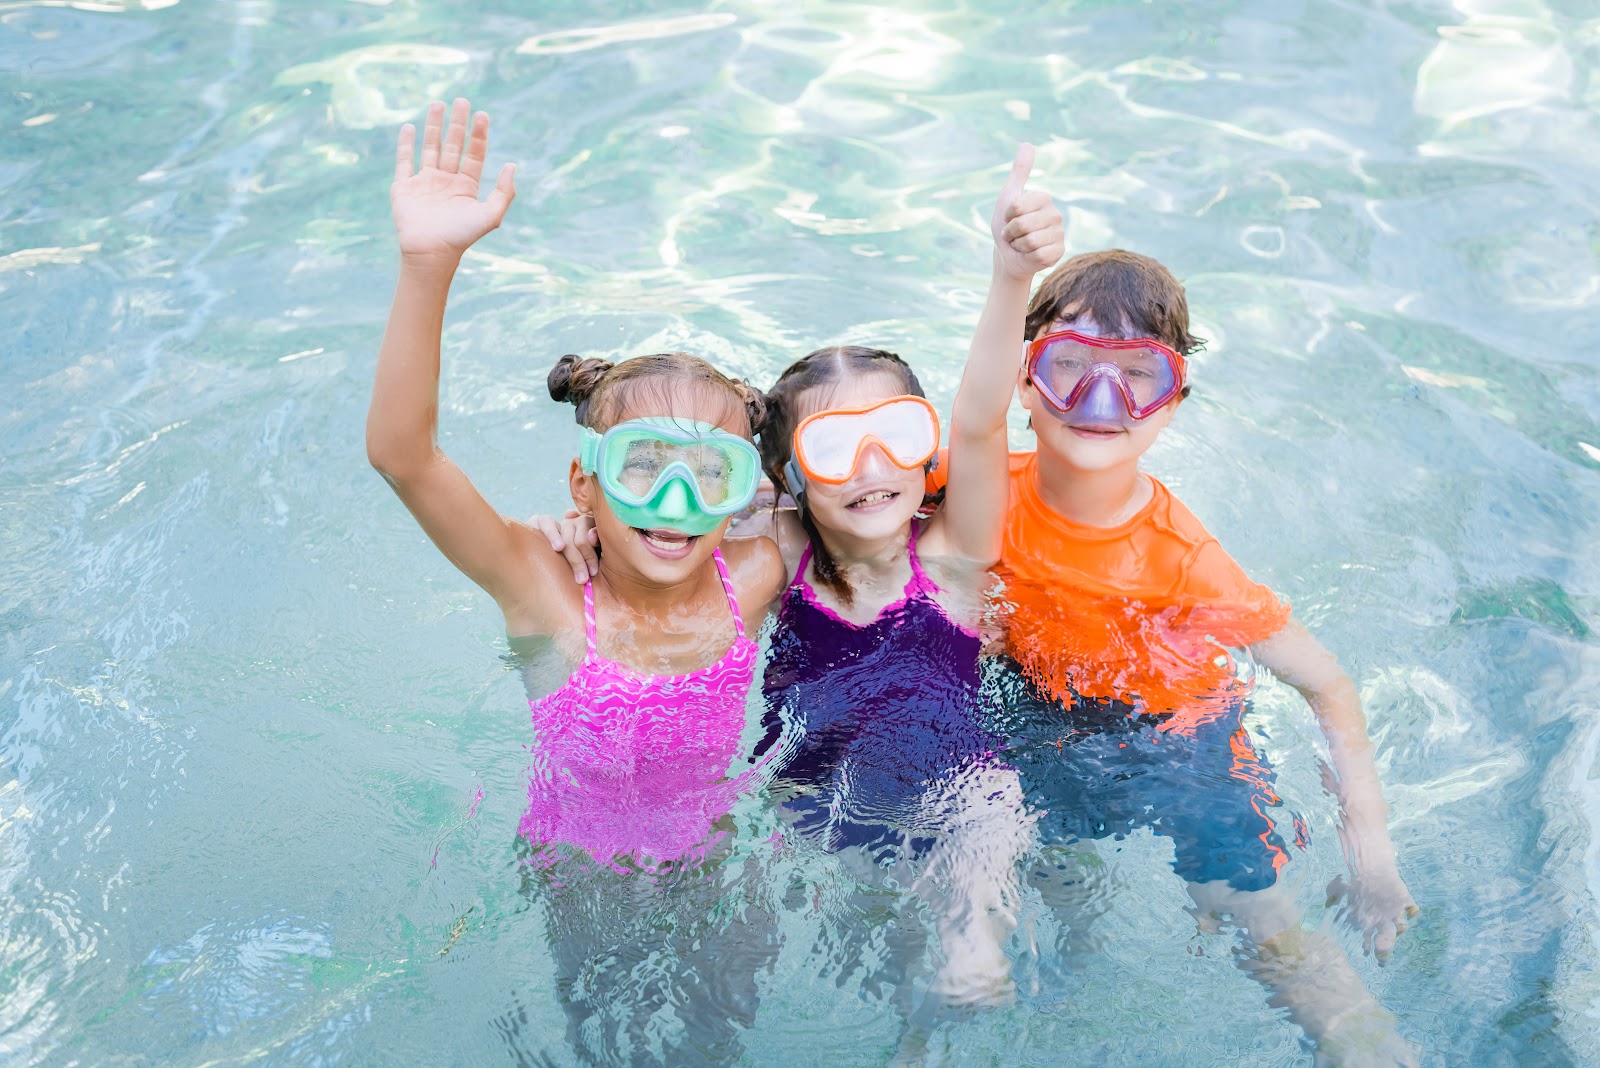 What to know about swimming and skin if your child has eczema